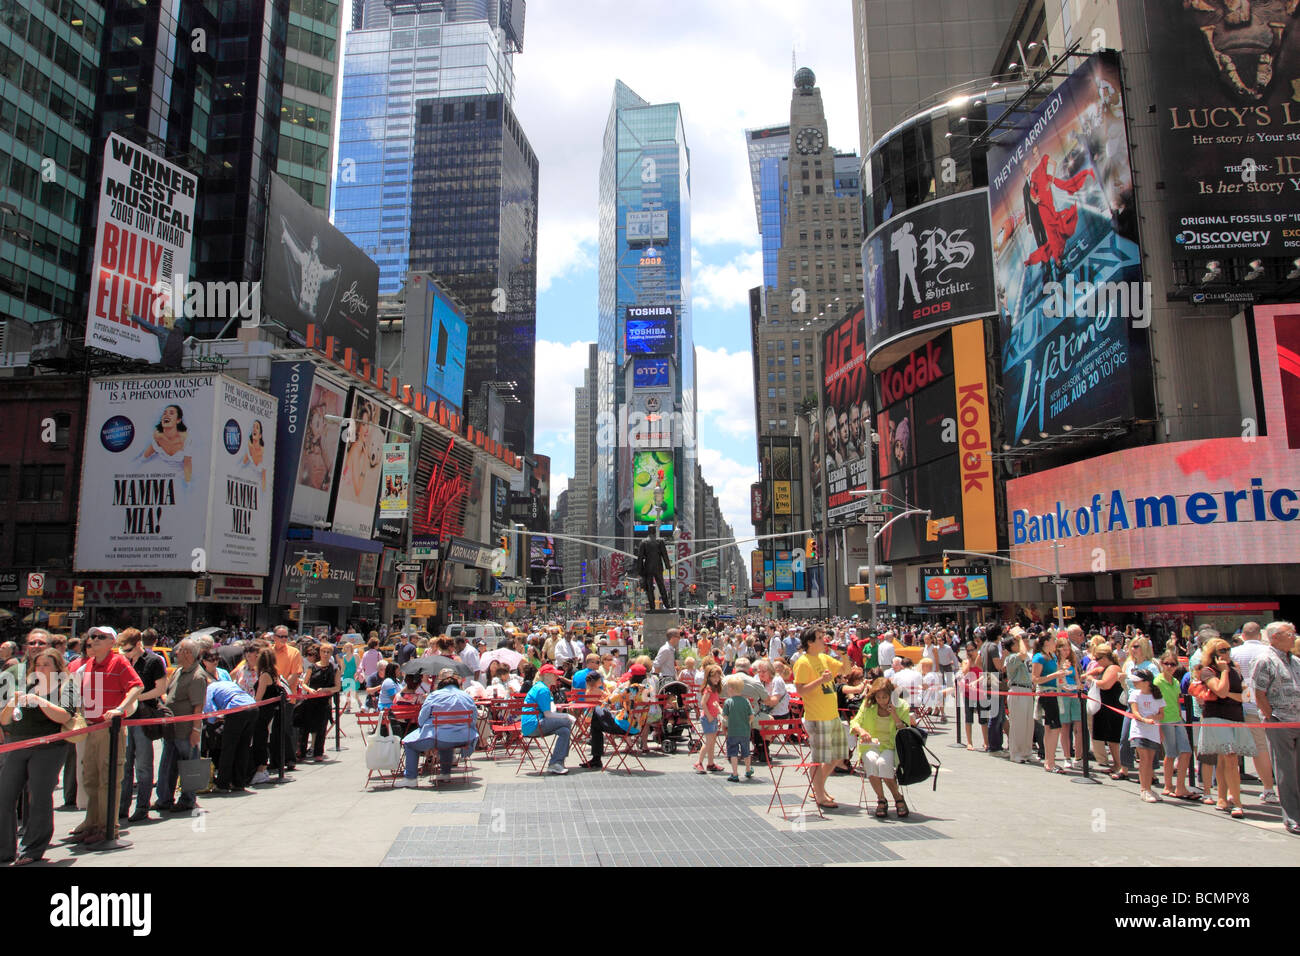 Crowds in Times Square, New York City USA Stock Photo